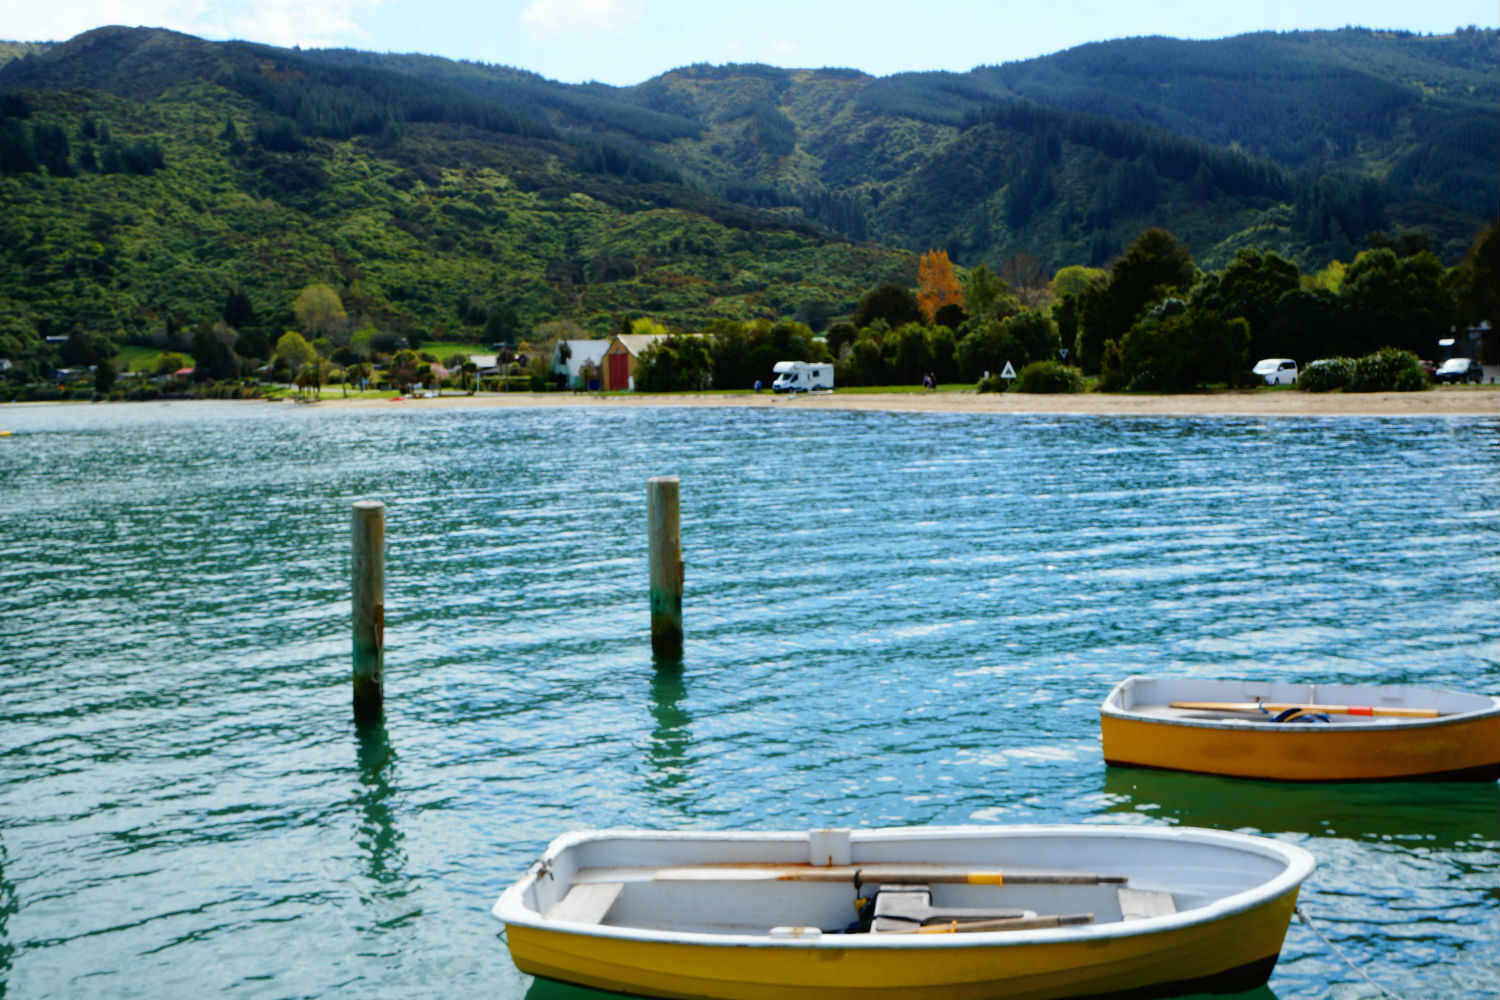 View from the pier in Anakiwa - Walking Queen Charlotte Track - The Global Curious Travel Blog